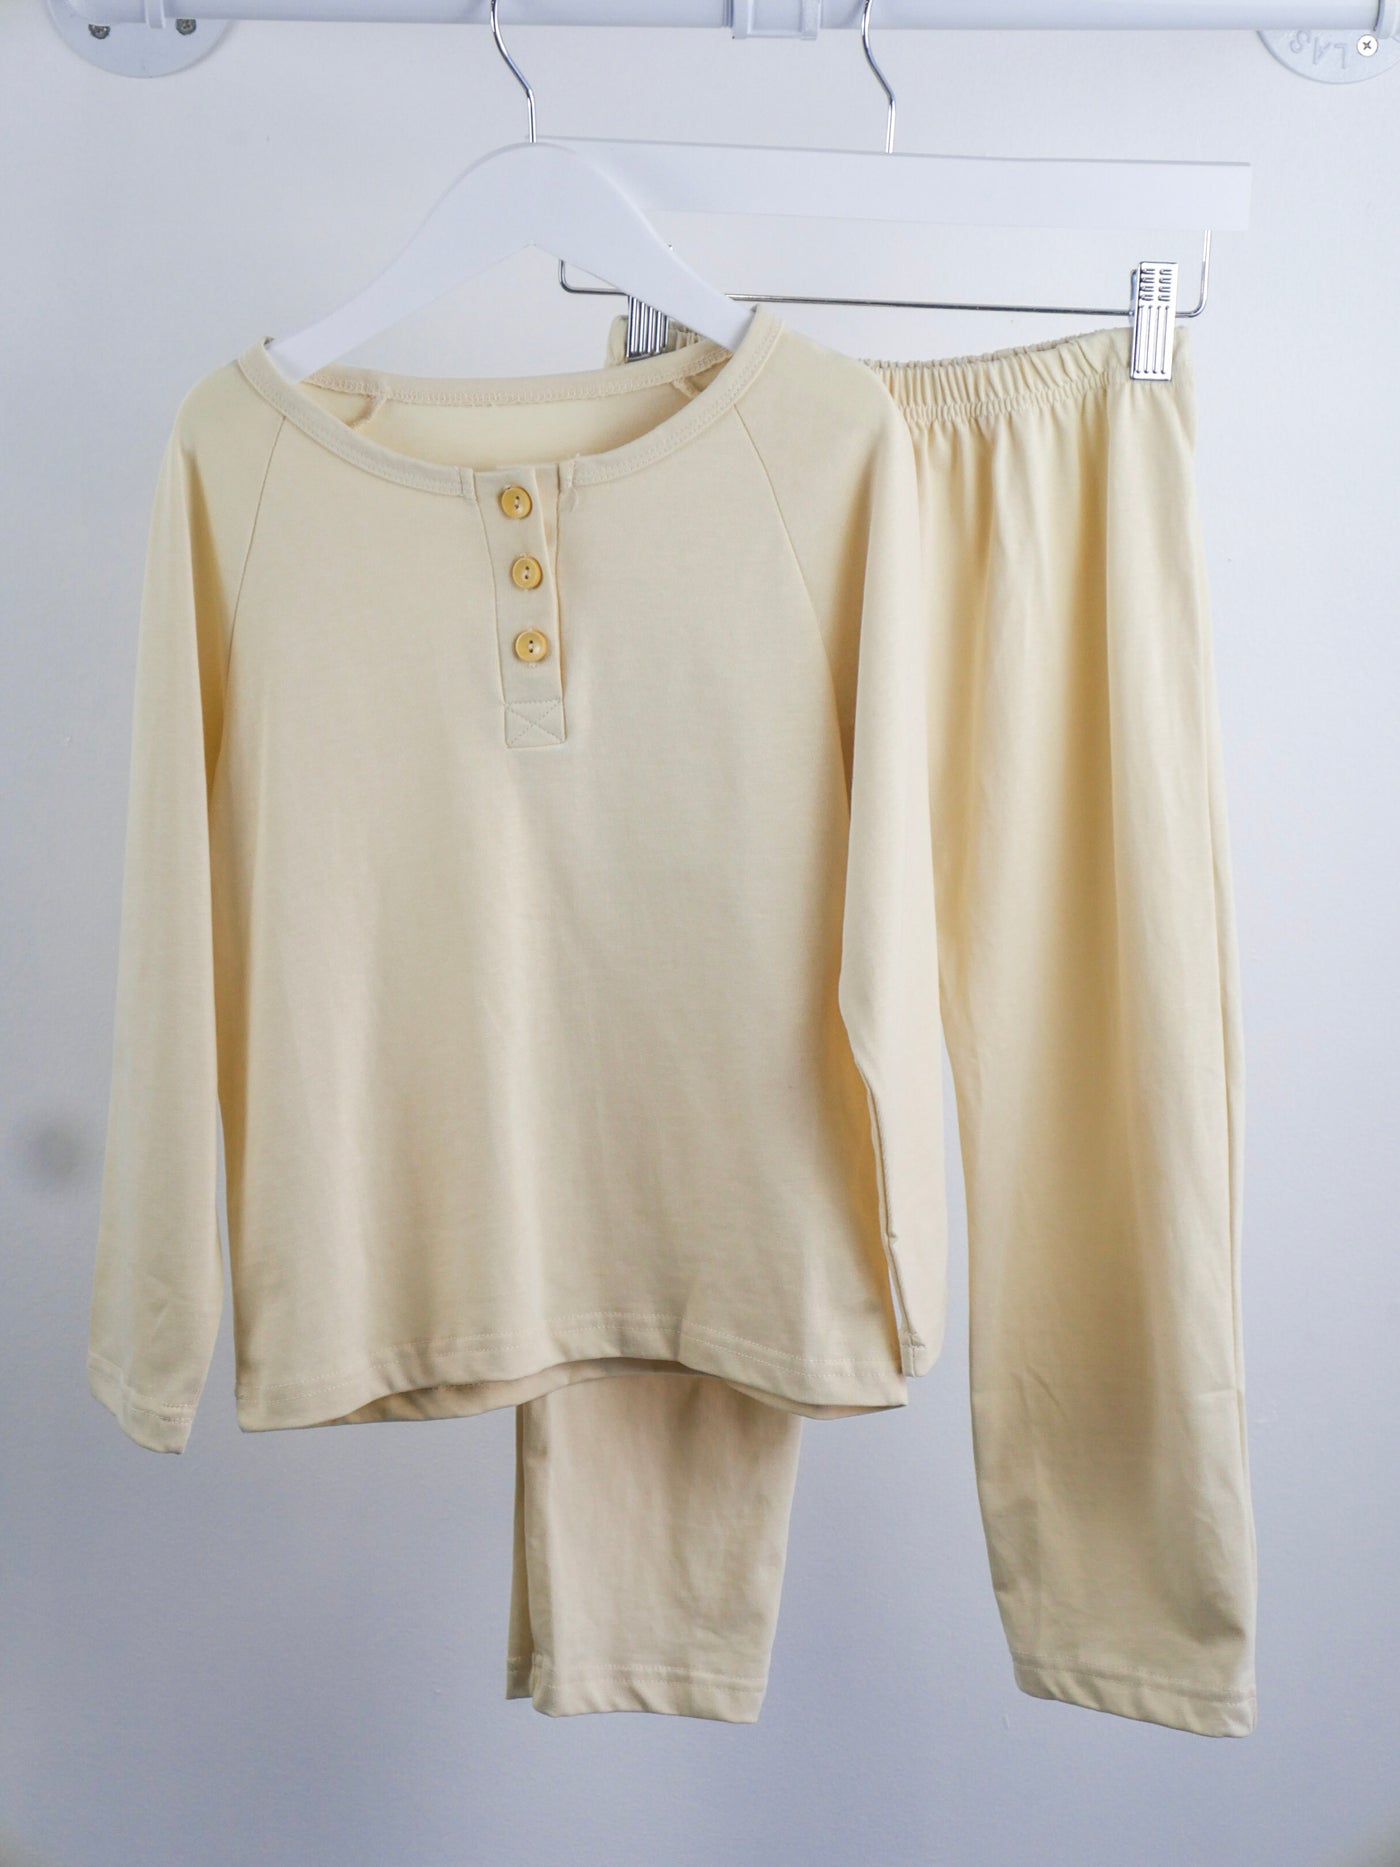 Beige light weight shirt with long sleeves and matching pants with elastic waist